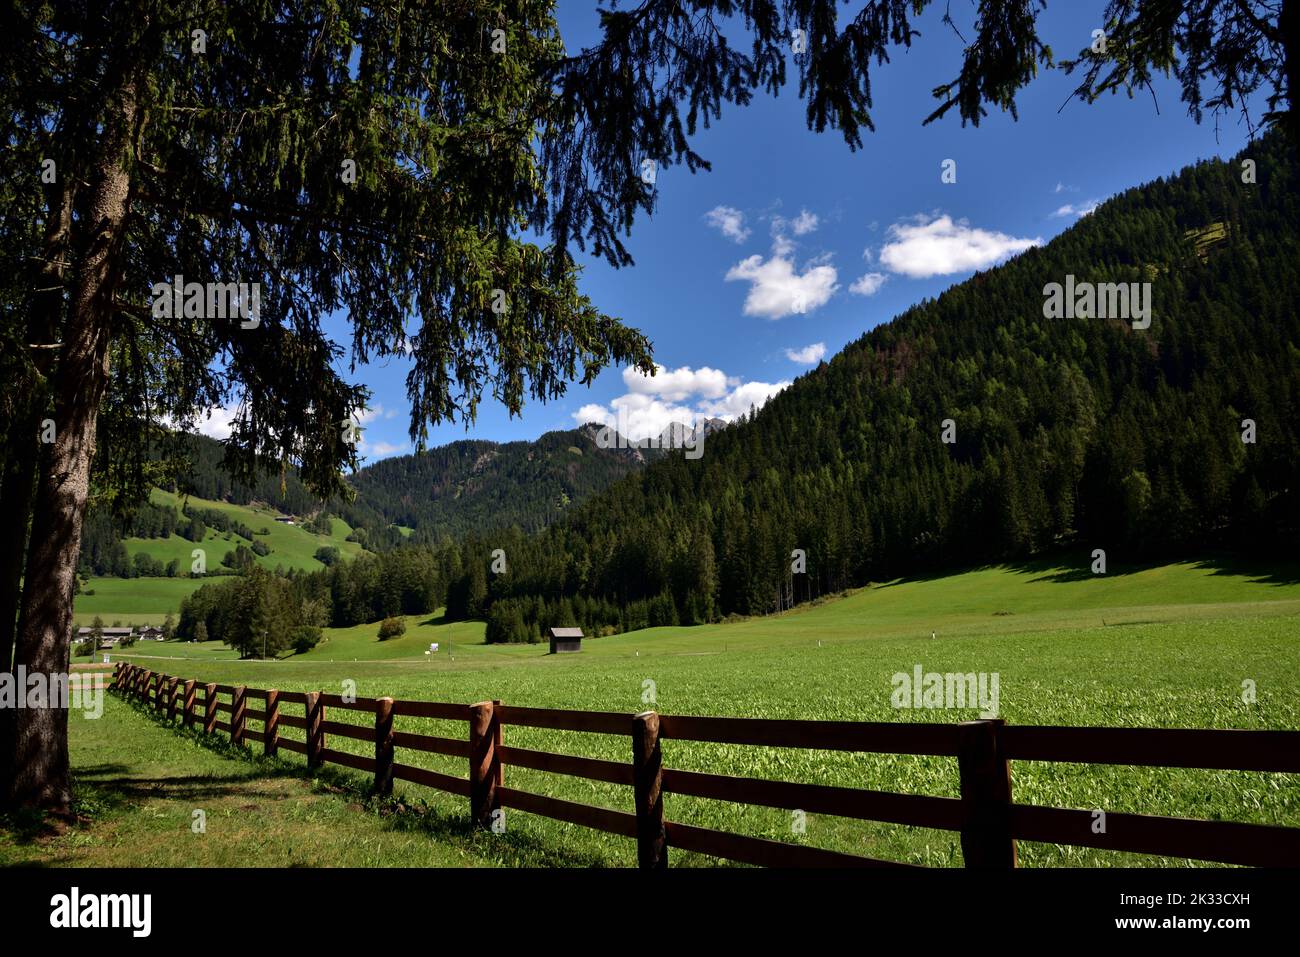 In the Braies valley, along the road that leads to the famous lake, there are vast wooded areas and expanses of grass reminiscent of bucolic landscape Stock Photo